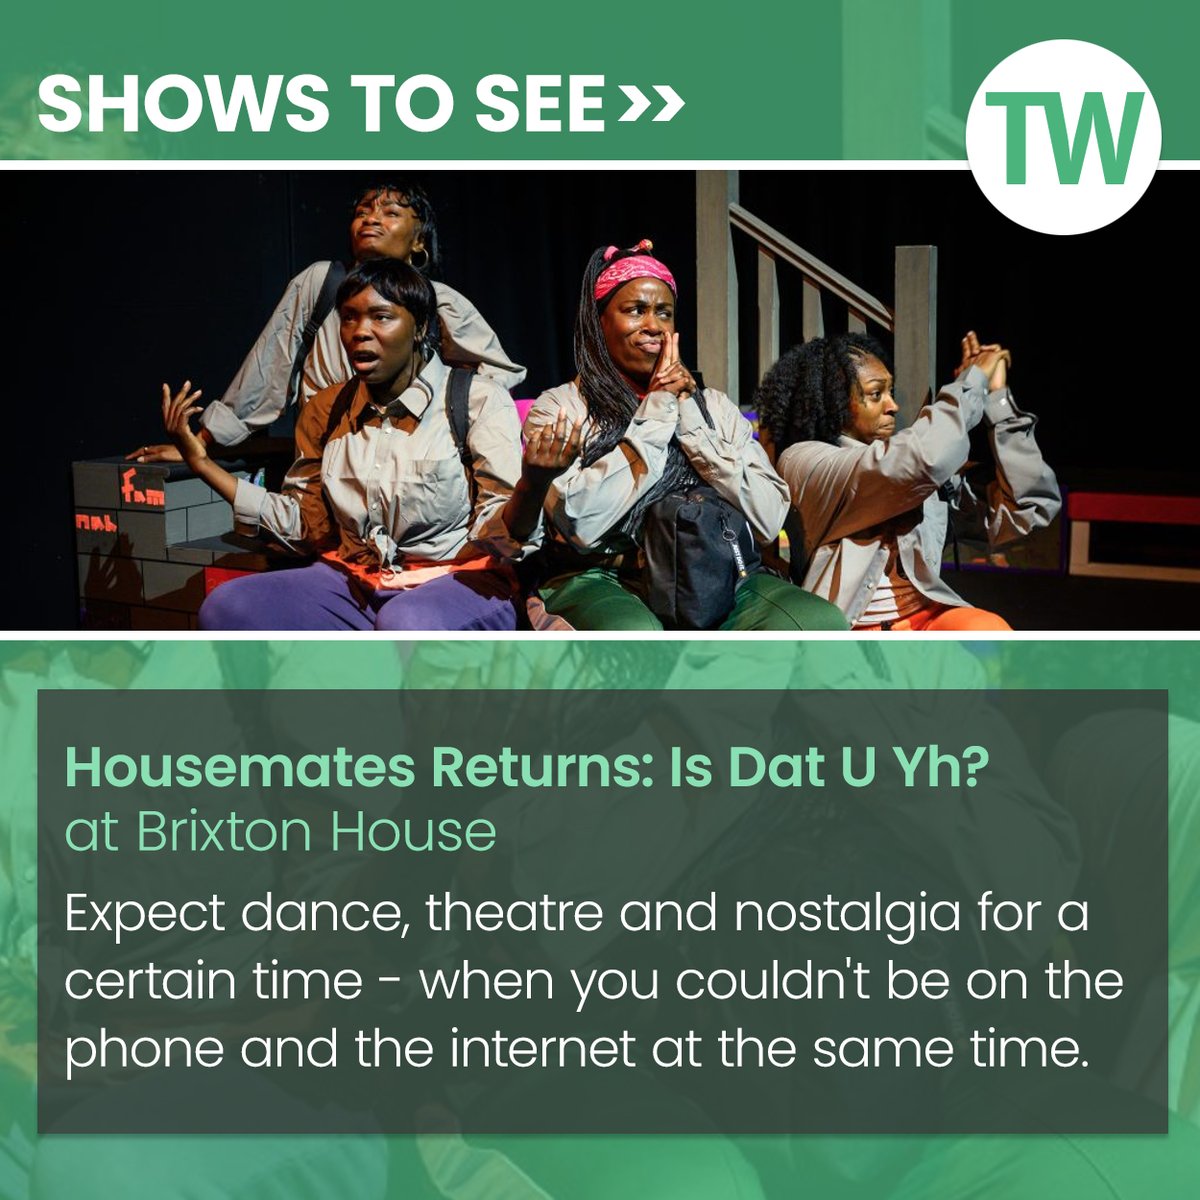 Among our recommended shows to see this week: ‘Housemates Returns: Is Dat U Yh?’ at Brixton House. Get more show tips here: bit.ly/442CiZE @BrxHouseTheatre